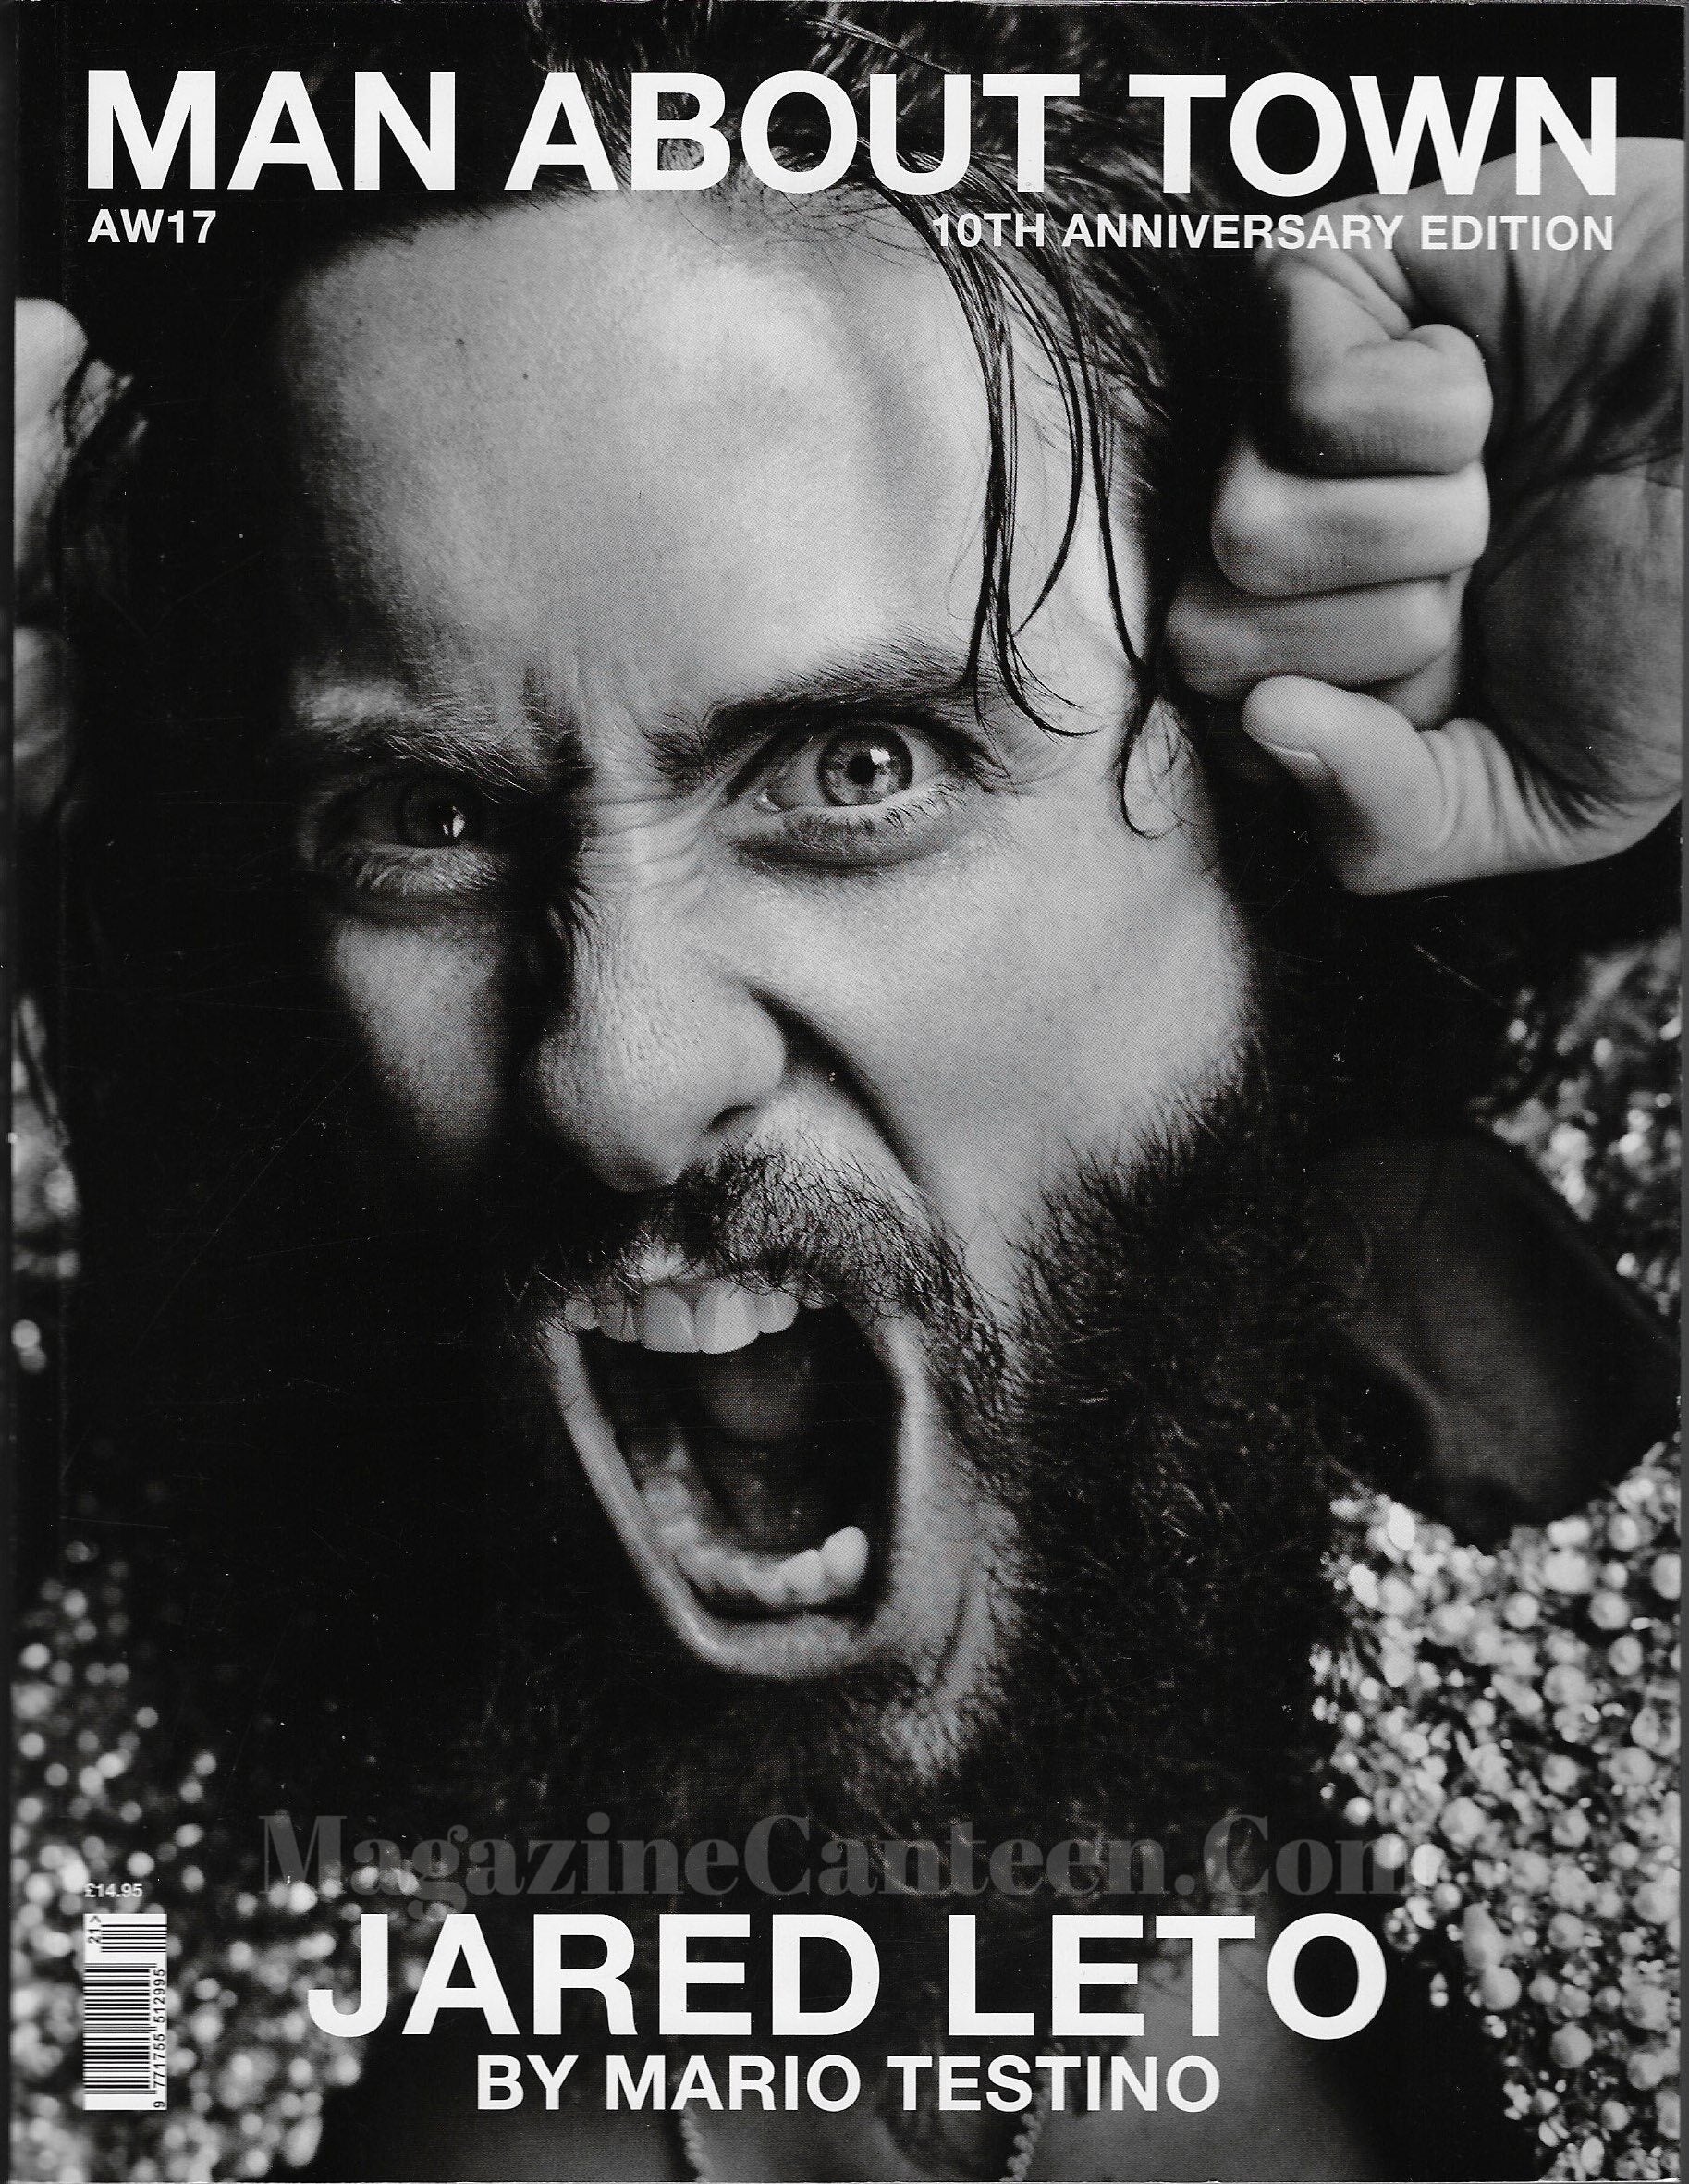 Man About Town Magazine - Jared Leto 2017